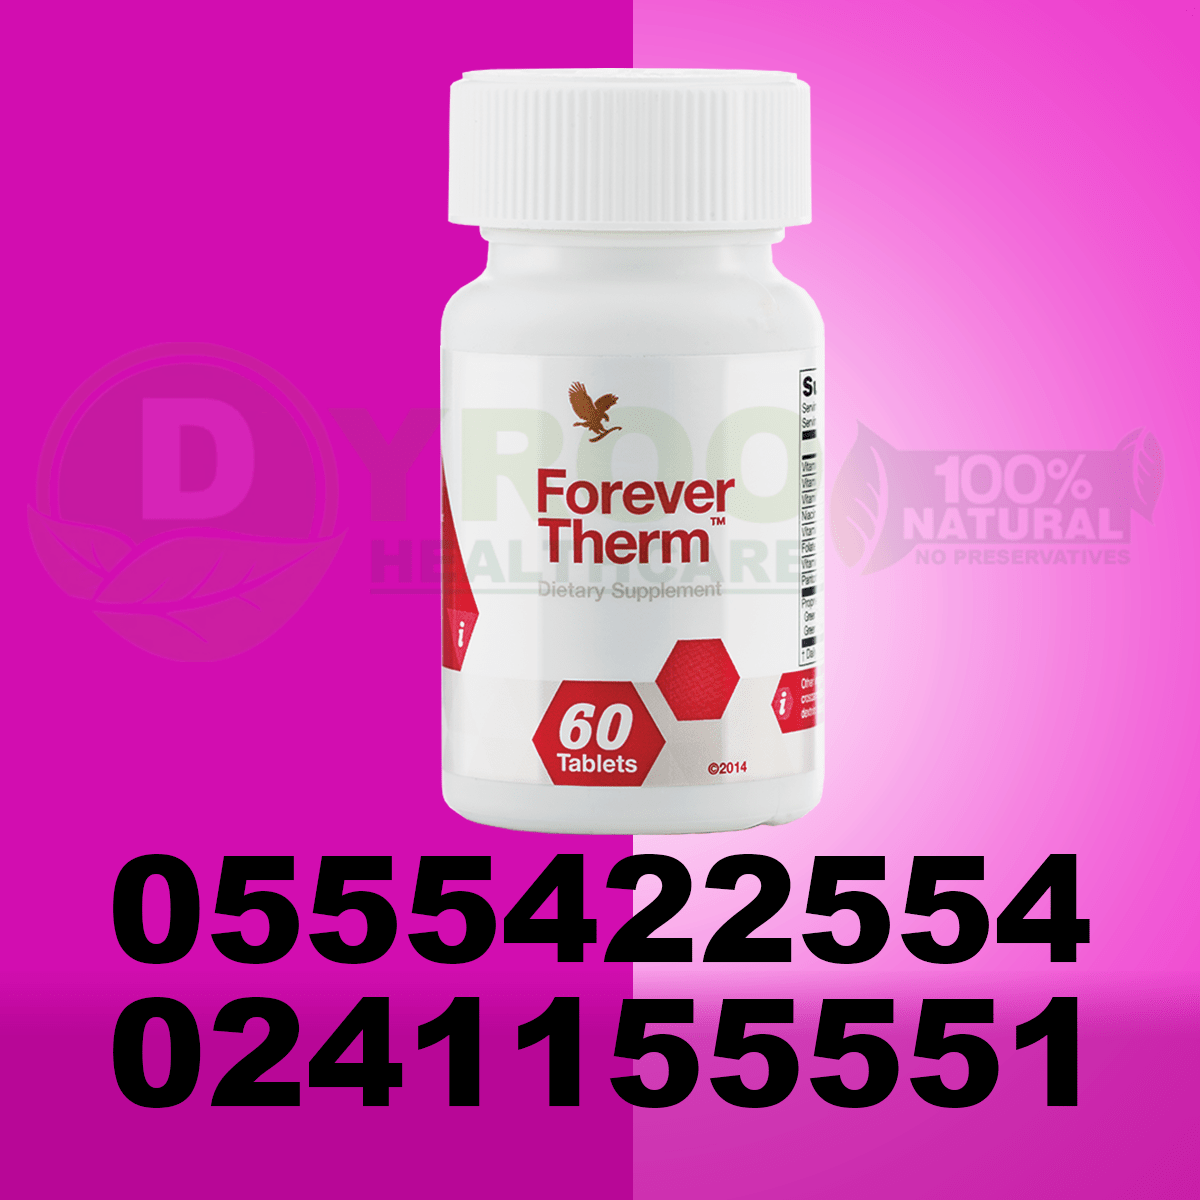 Forever Therm Price in Ghana